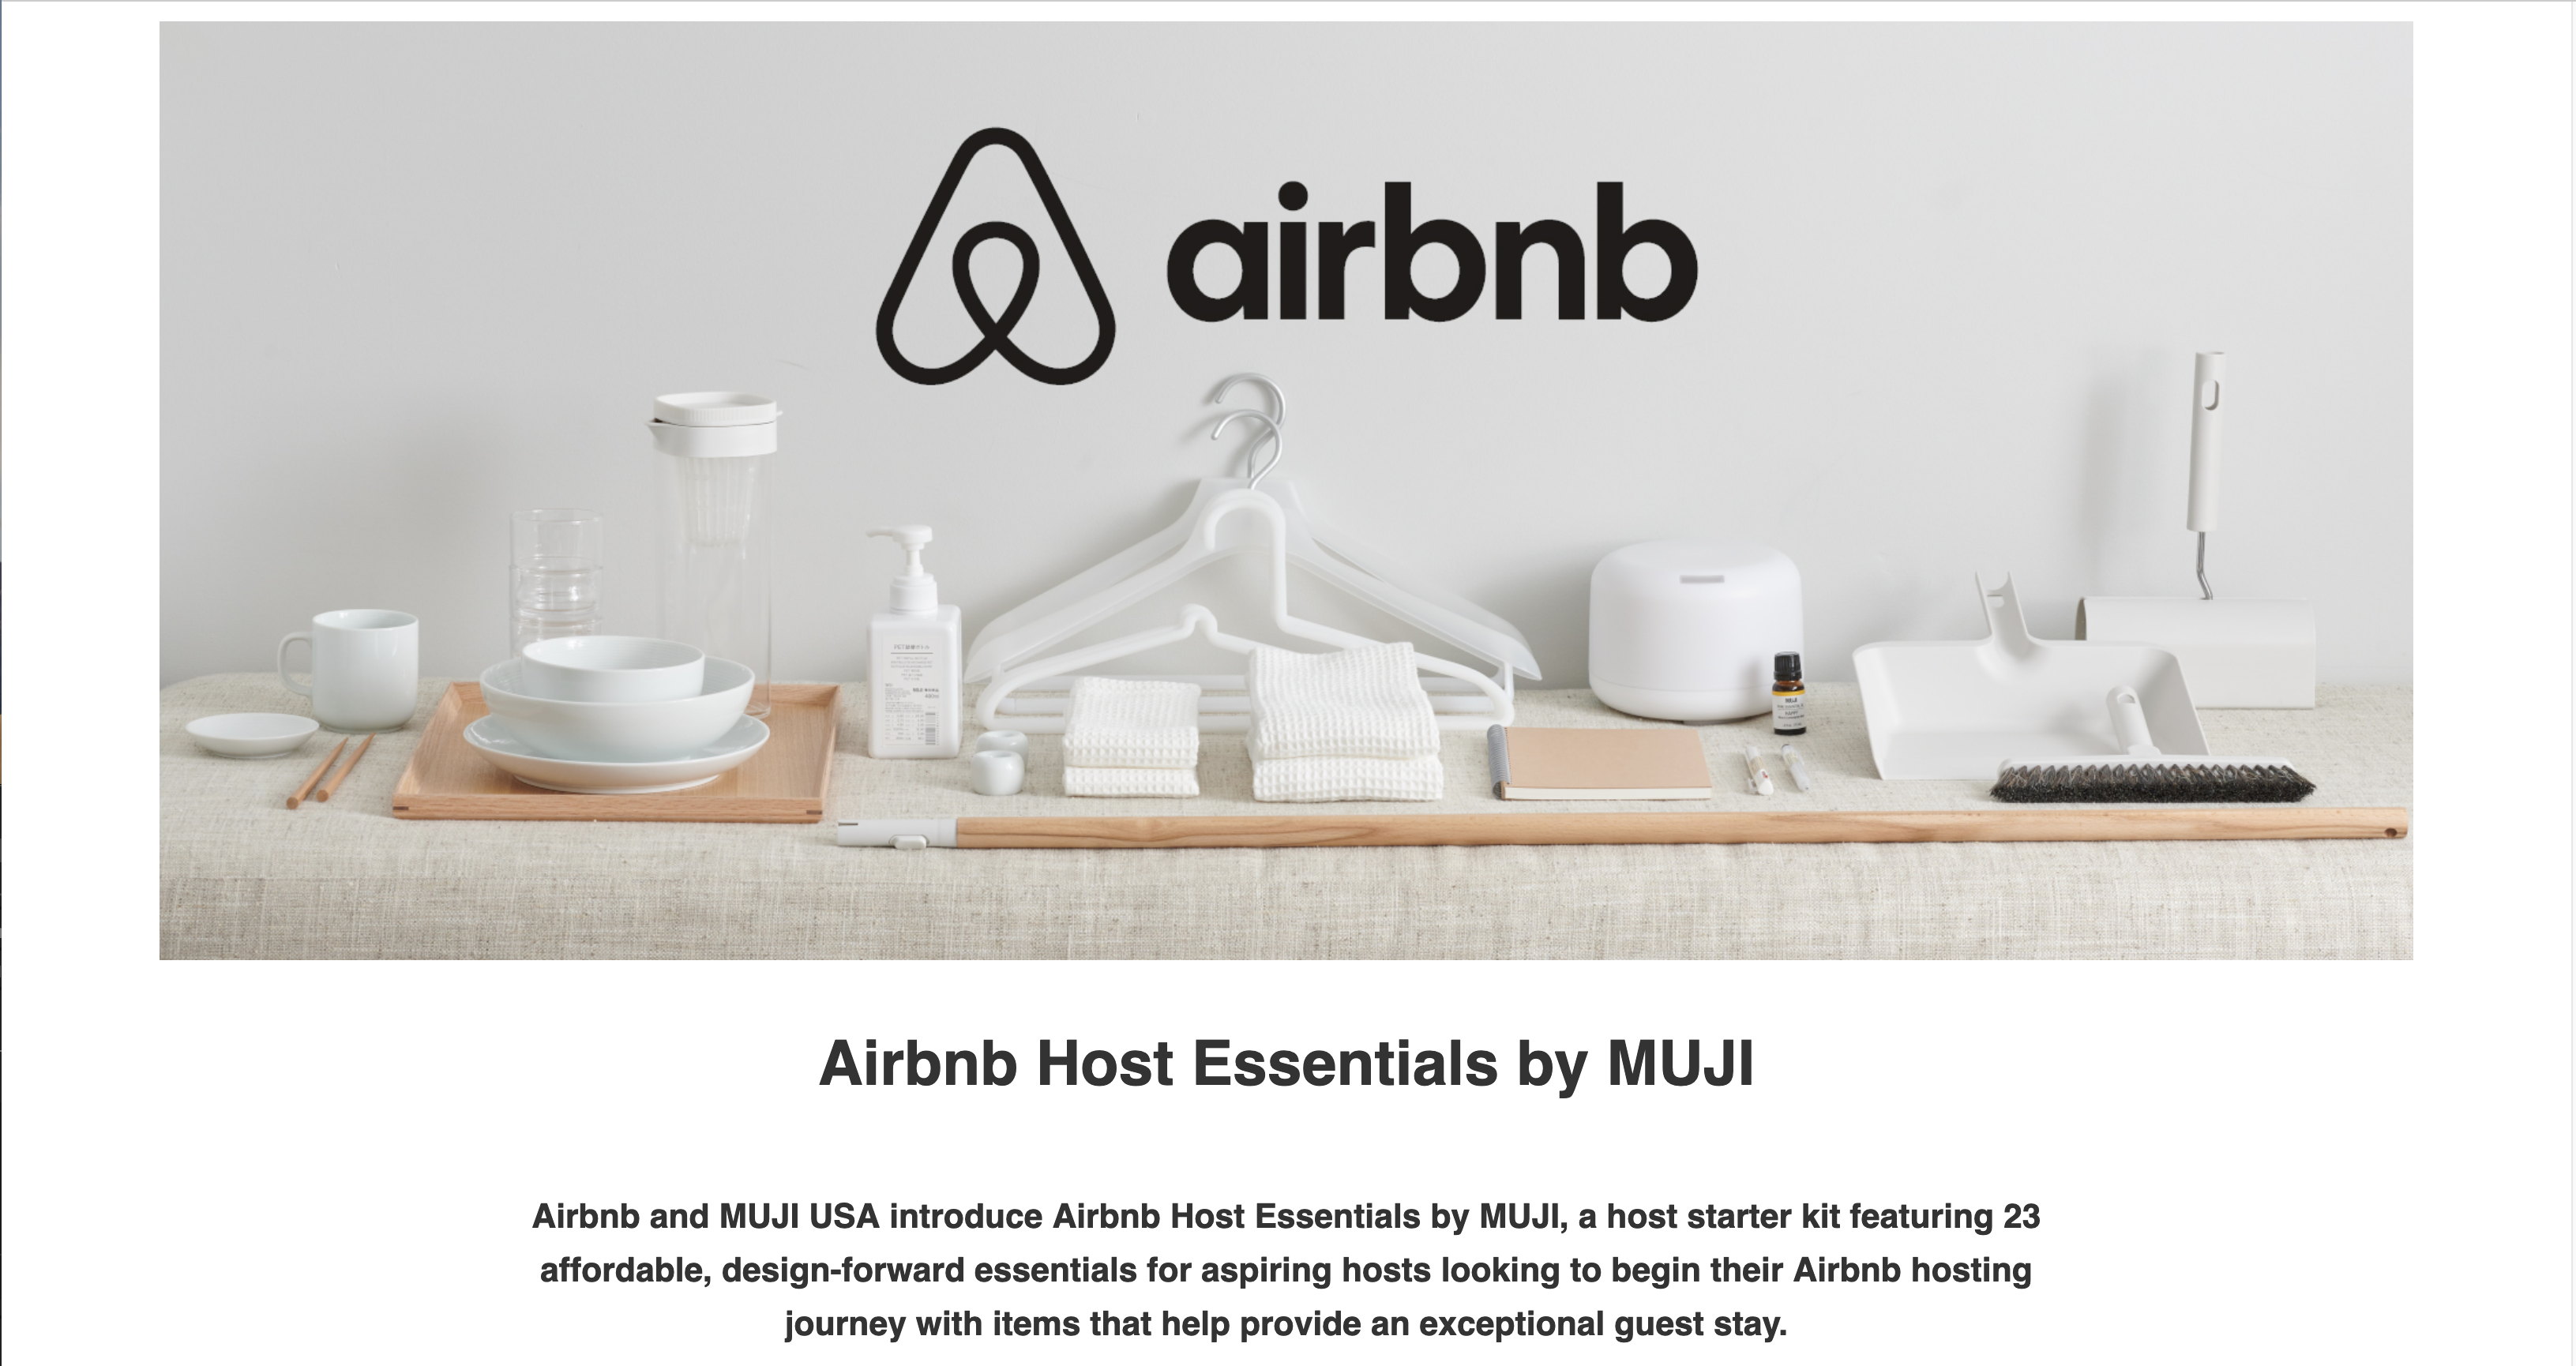 Air bnb and muji ad by Alison Gootee Photography